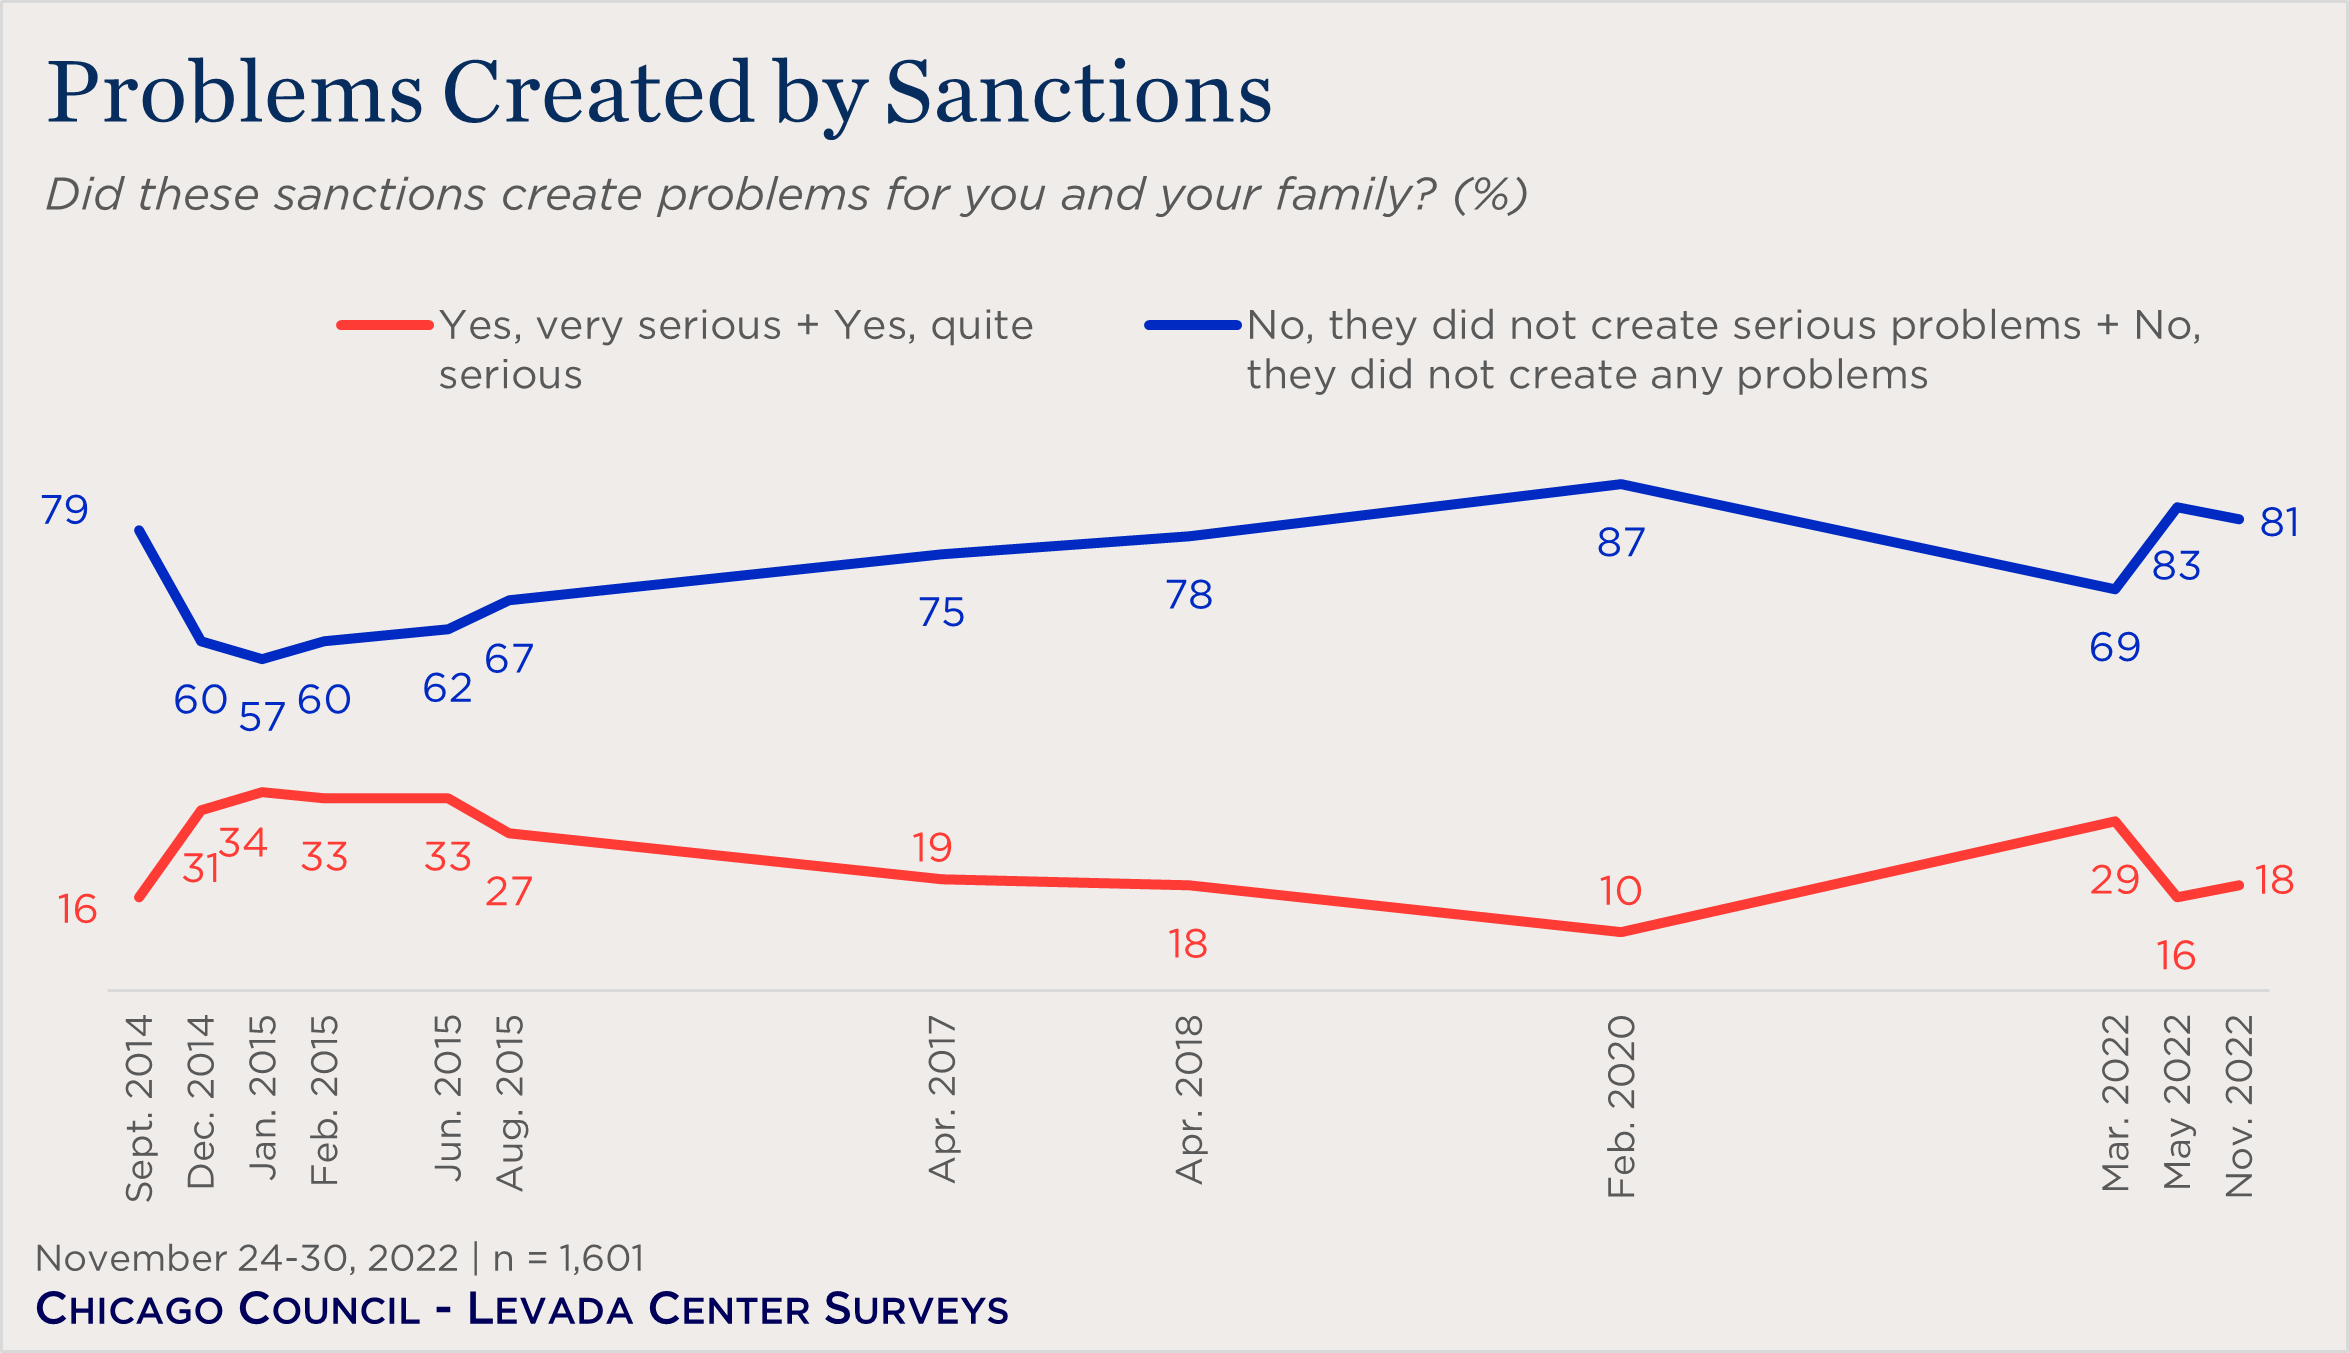 line chart showing perceptions of problems created by sanctions over time